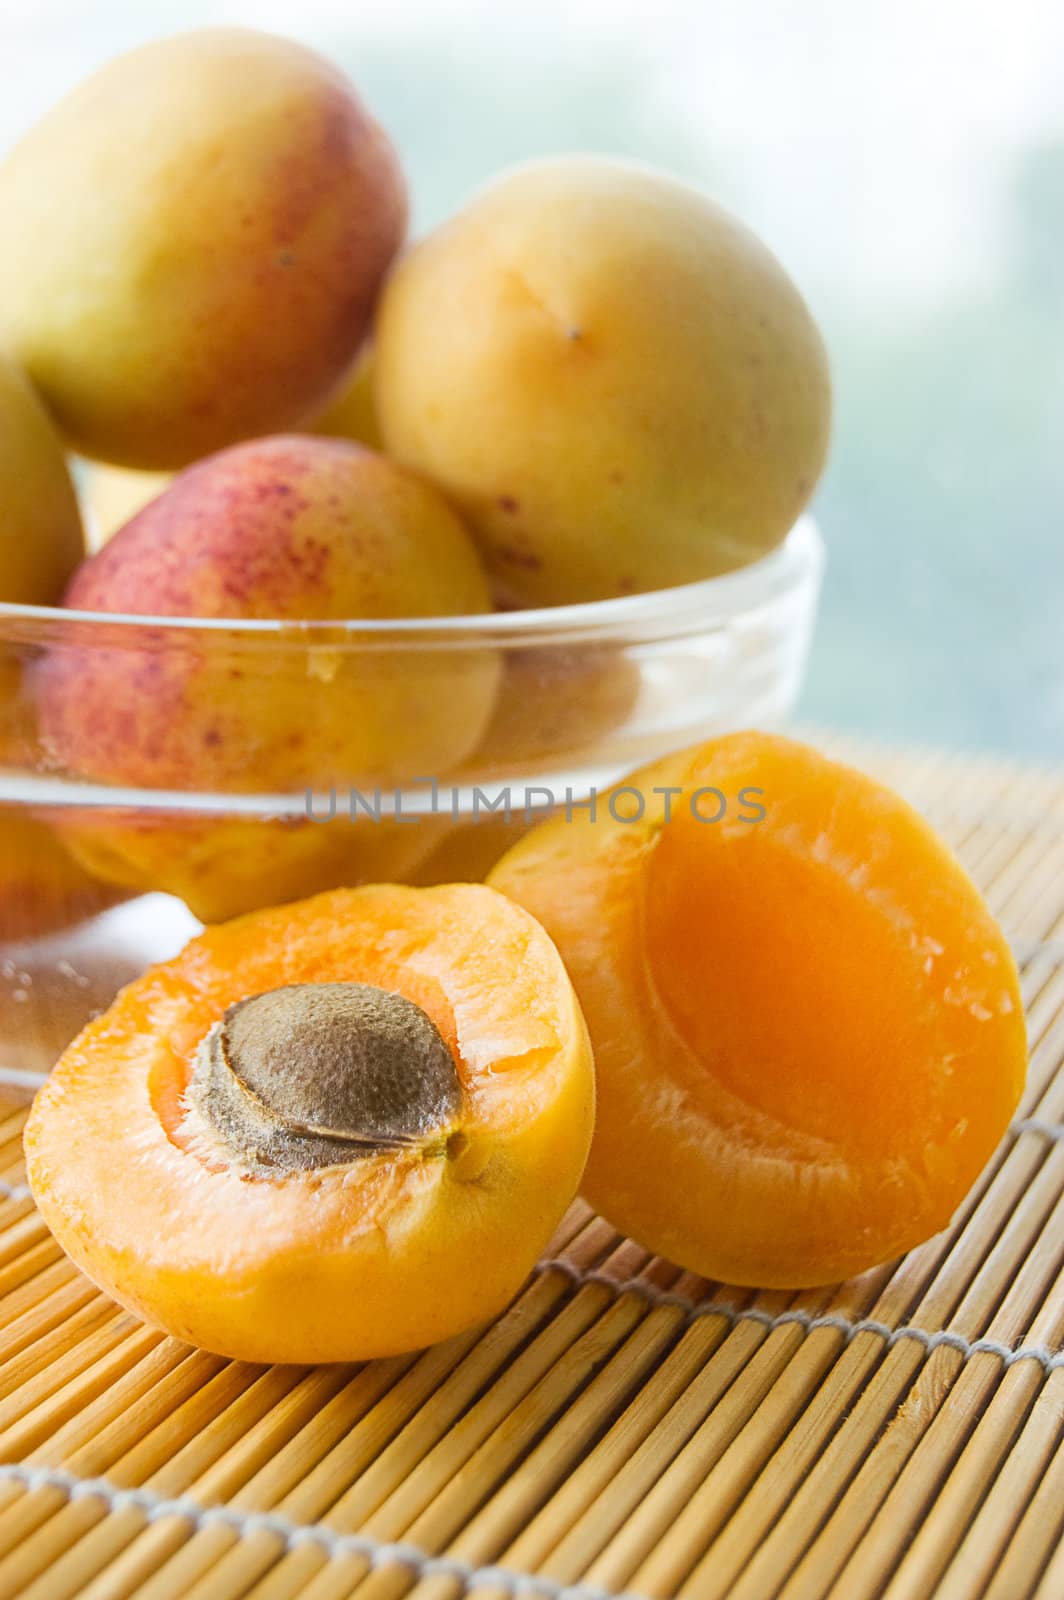 Ripe apricots in plate on table